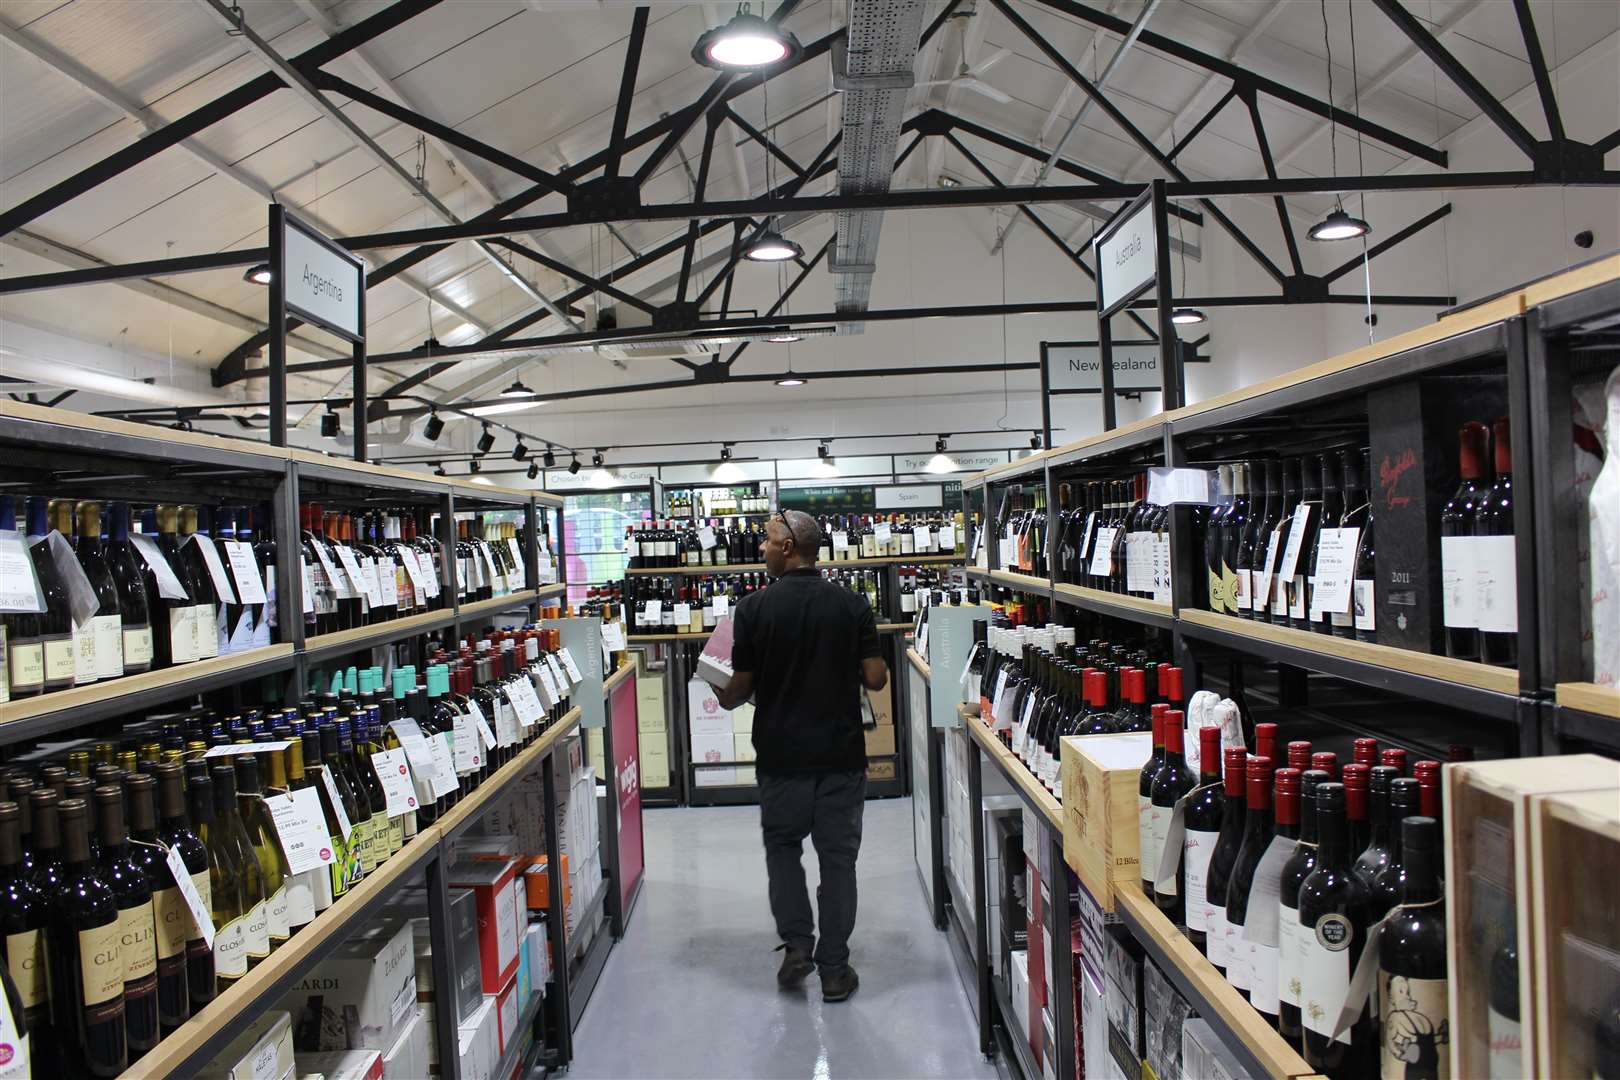 Majestic Wine has outlets in Canterbury and Tenterden (8040405)